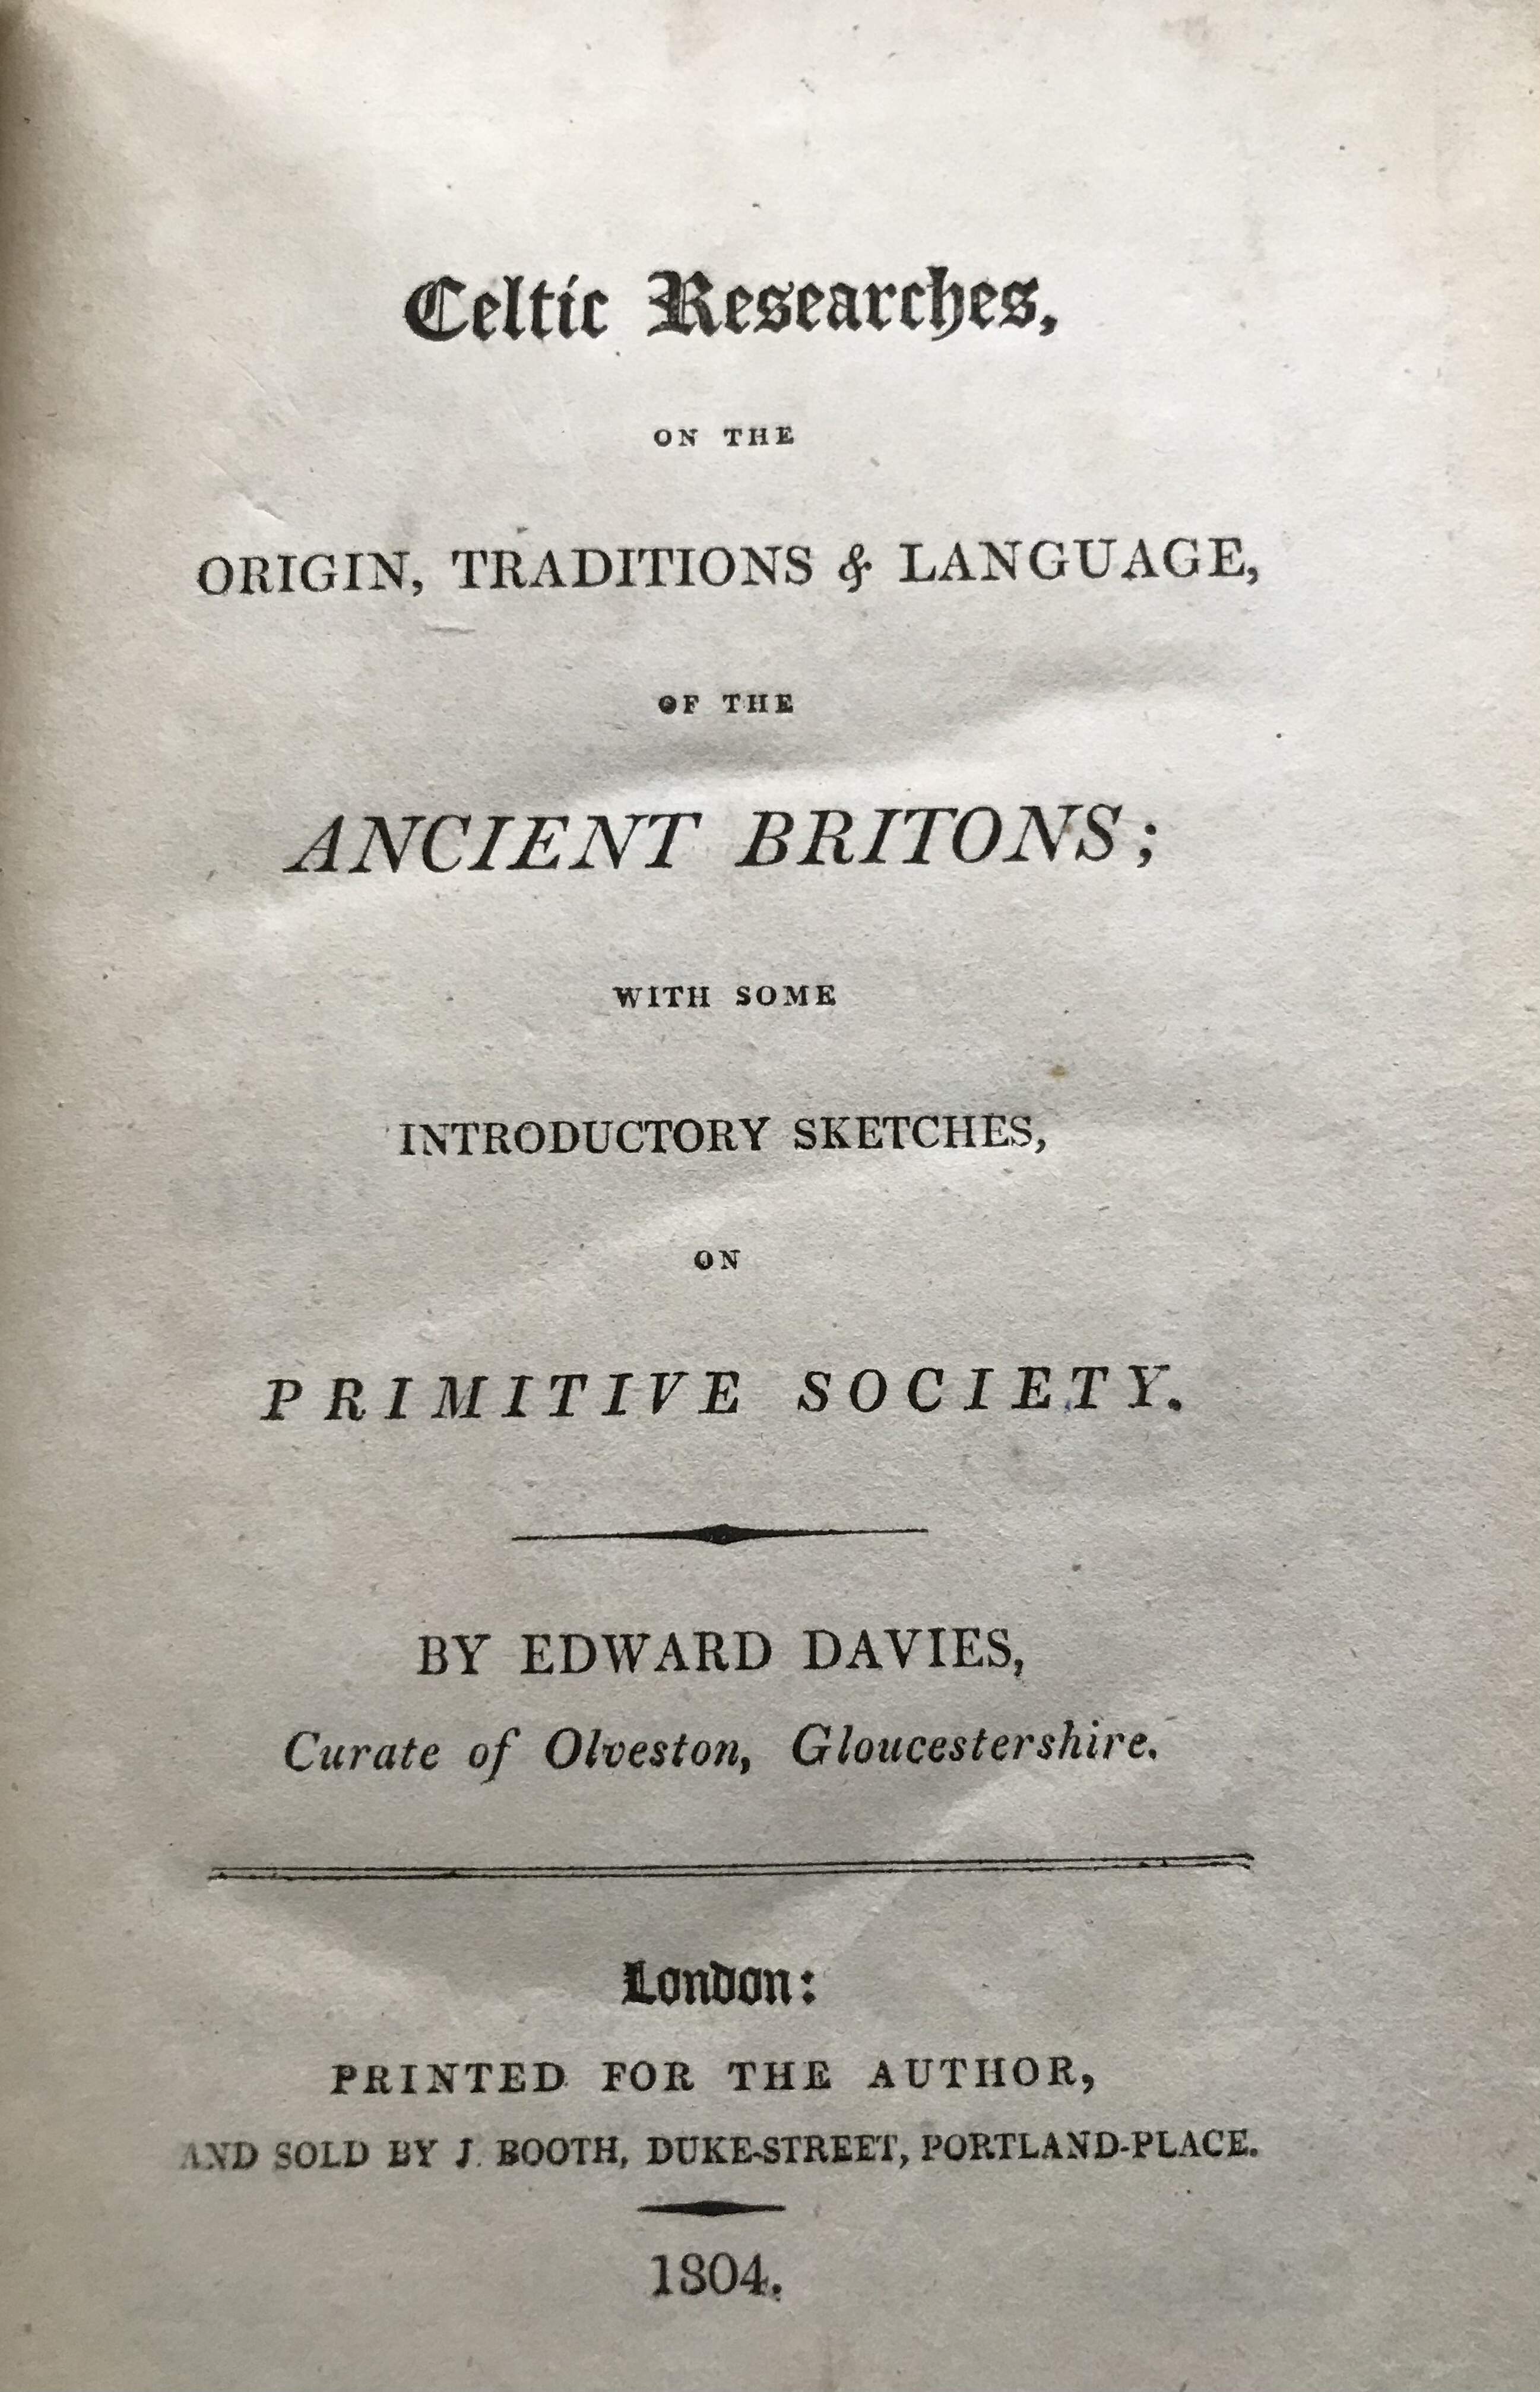 Celtic Researches, on the Origin, Traditions & Language of Ancient Britons by Edward Davies